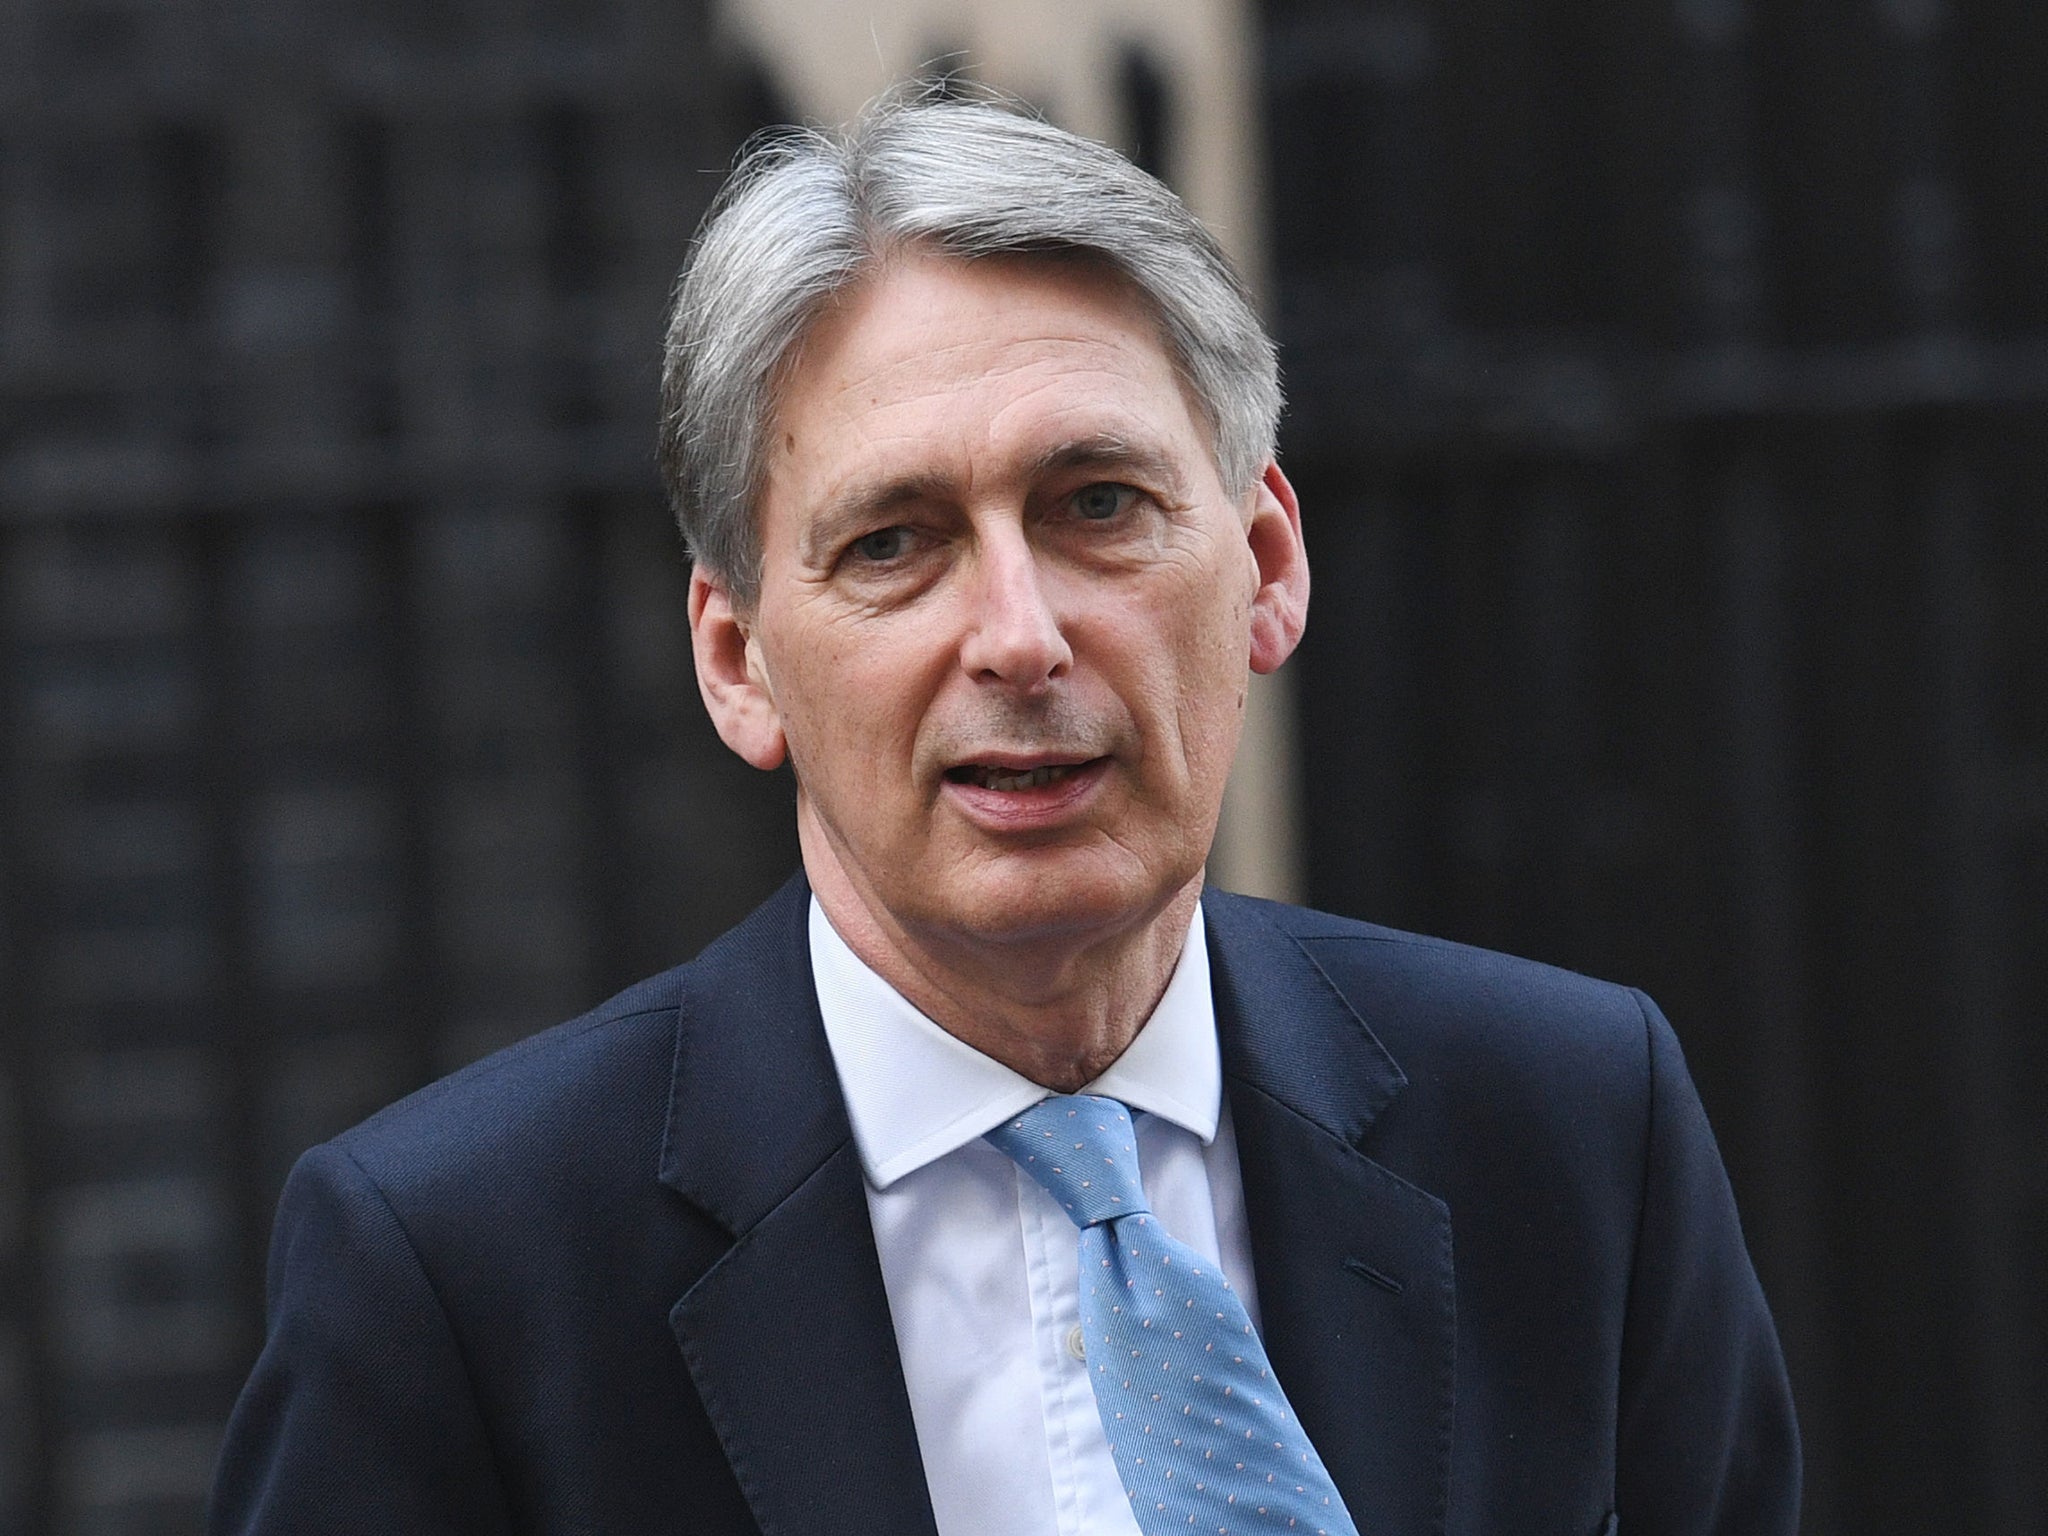 Chancellor Philip Hammond acknowledged the public is 'weary' of austerity